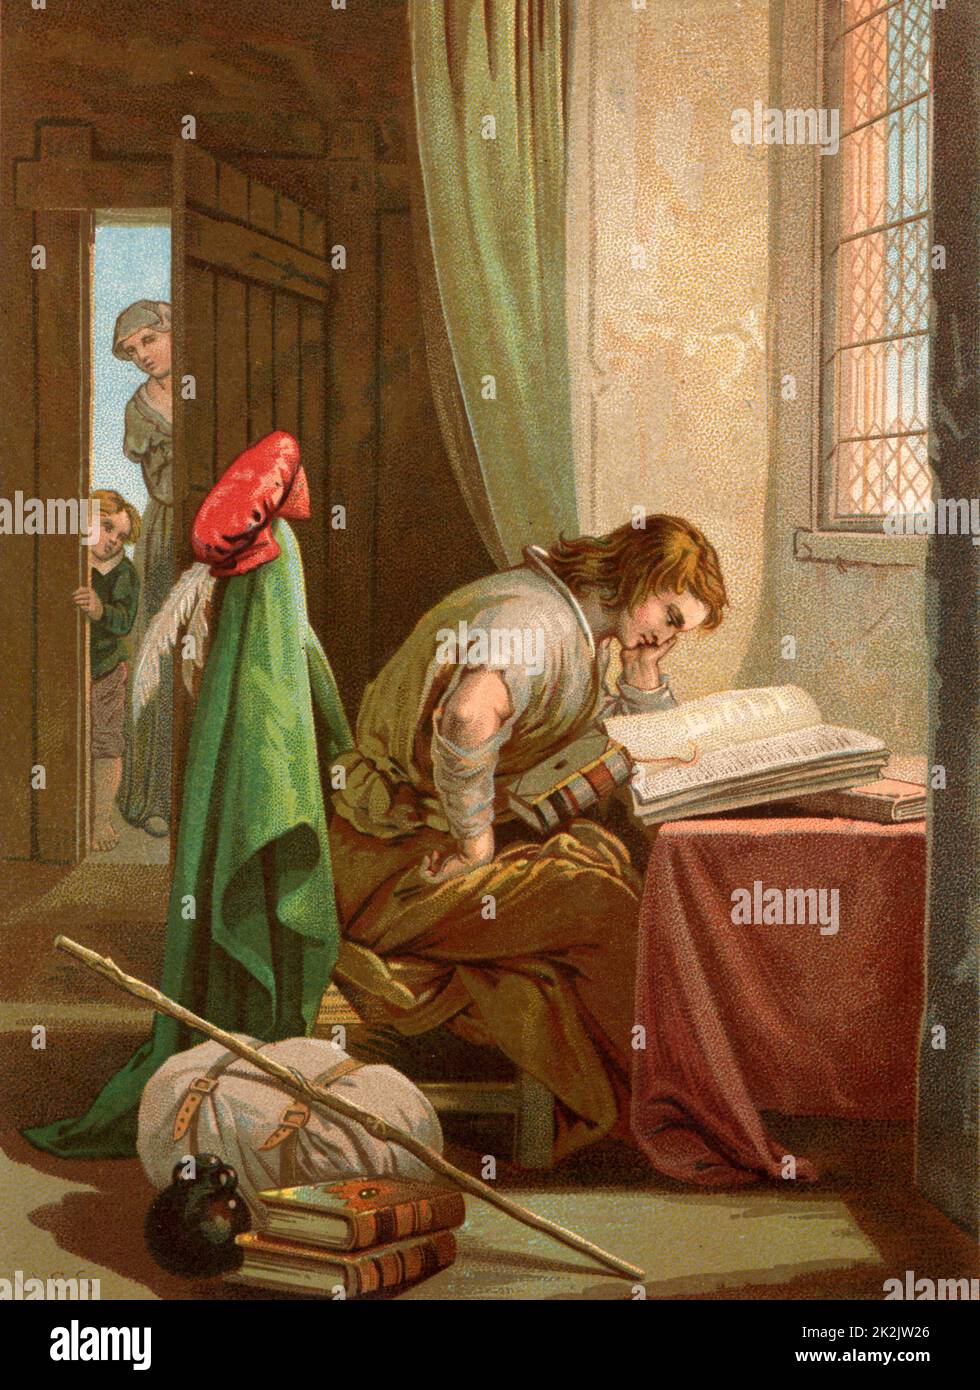 Christian Weeps and Prays. Christian, the pilgrim of the title, reading his bible. Beside him are his pilgrim's pack, his staff, and pilgrim's flask. Illustration by Henry Courtney Selous (1803-1890) for an 1844 edition of 'The Pilgrim's Progress' by John Bunyan, originally published in 1678. Chromolithograph. Stock Photo